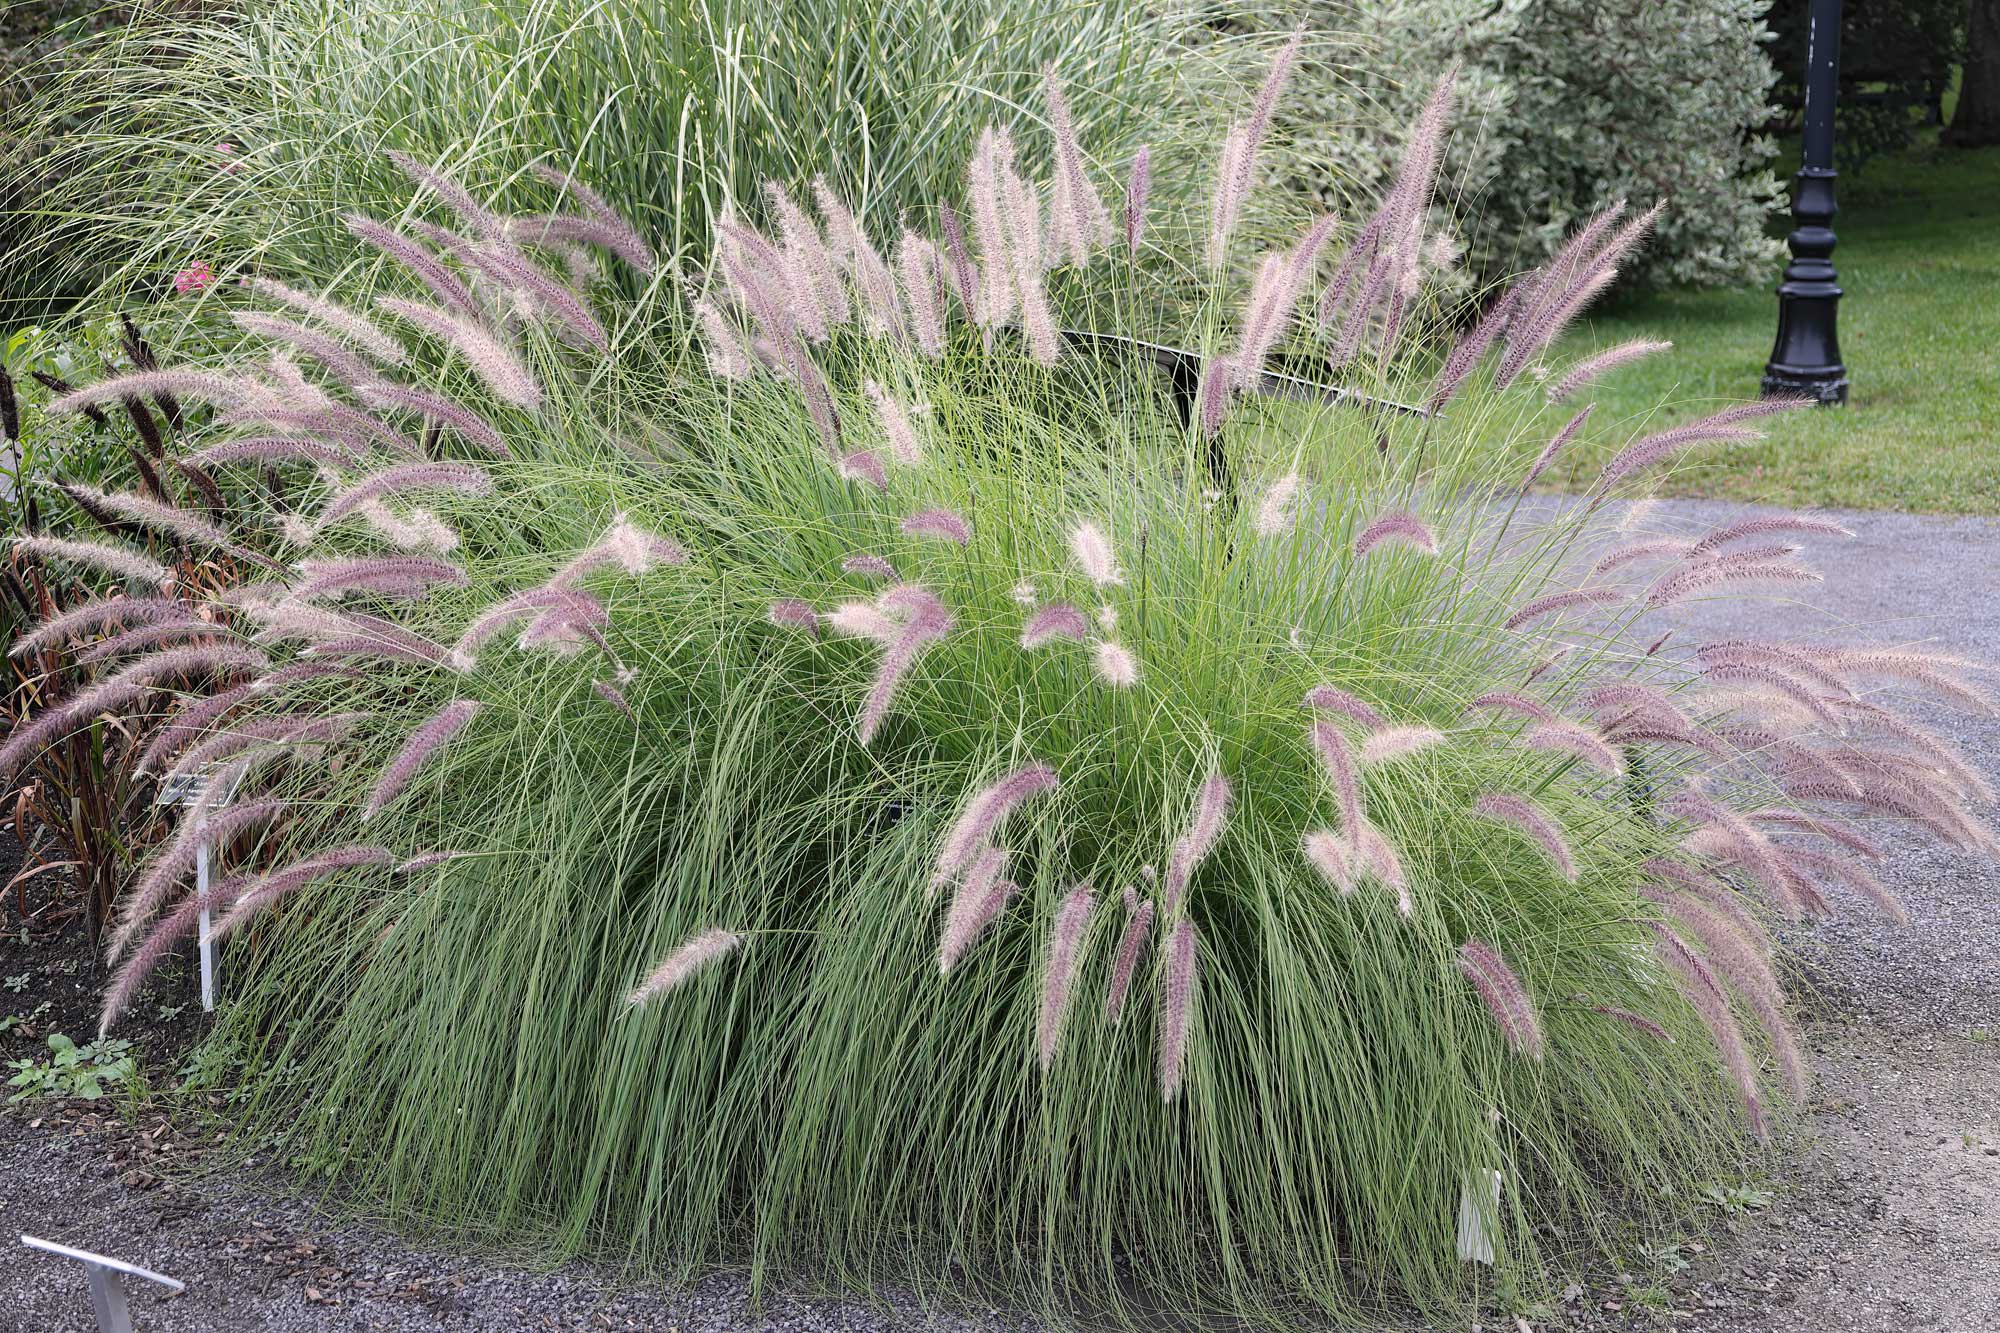 Photograph of crimson fountaingrass cultivated as an ornamental. The photo shows a clump of grass with long, thin leaves arcing toward the ground and long flowering culms with feathery purplish inflorescences.